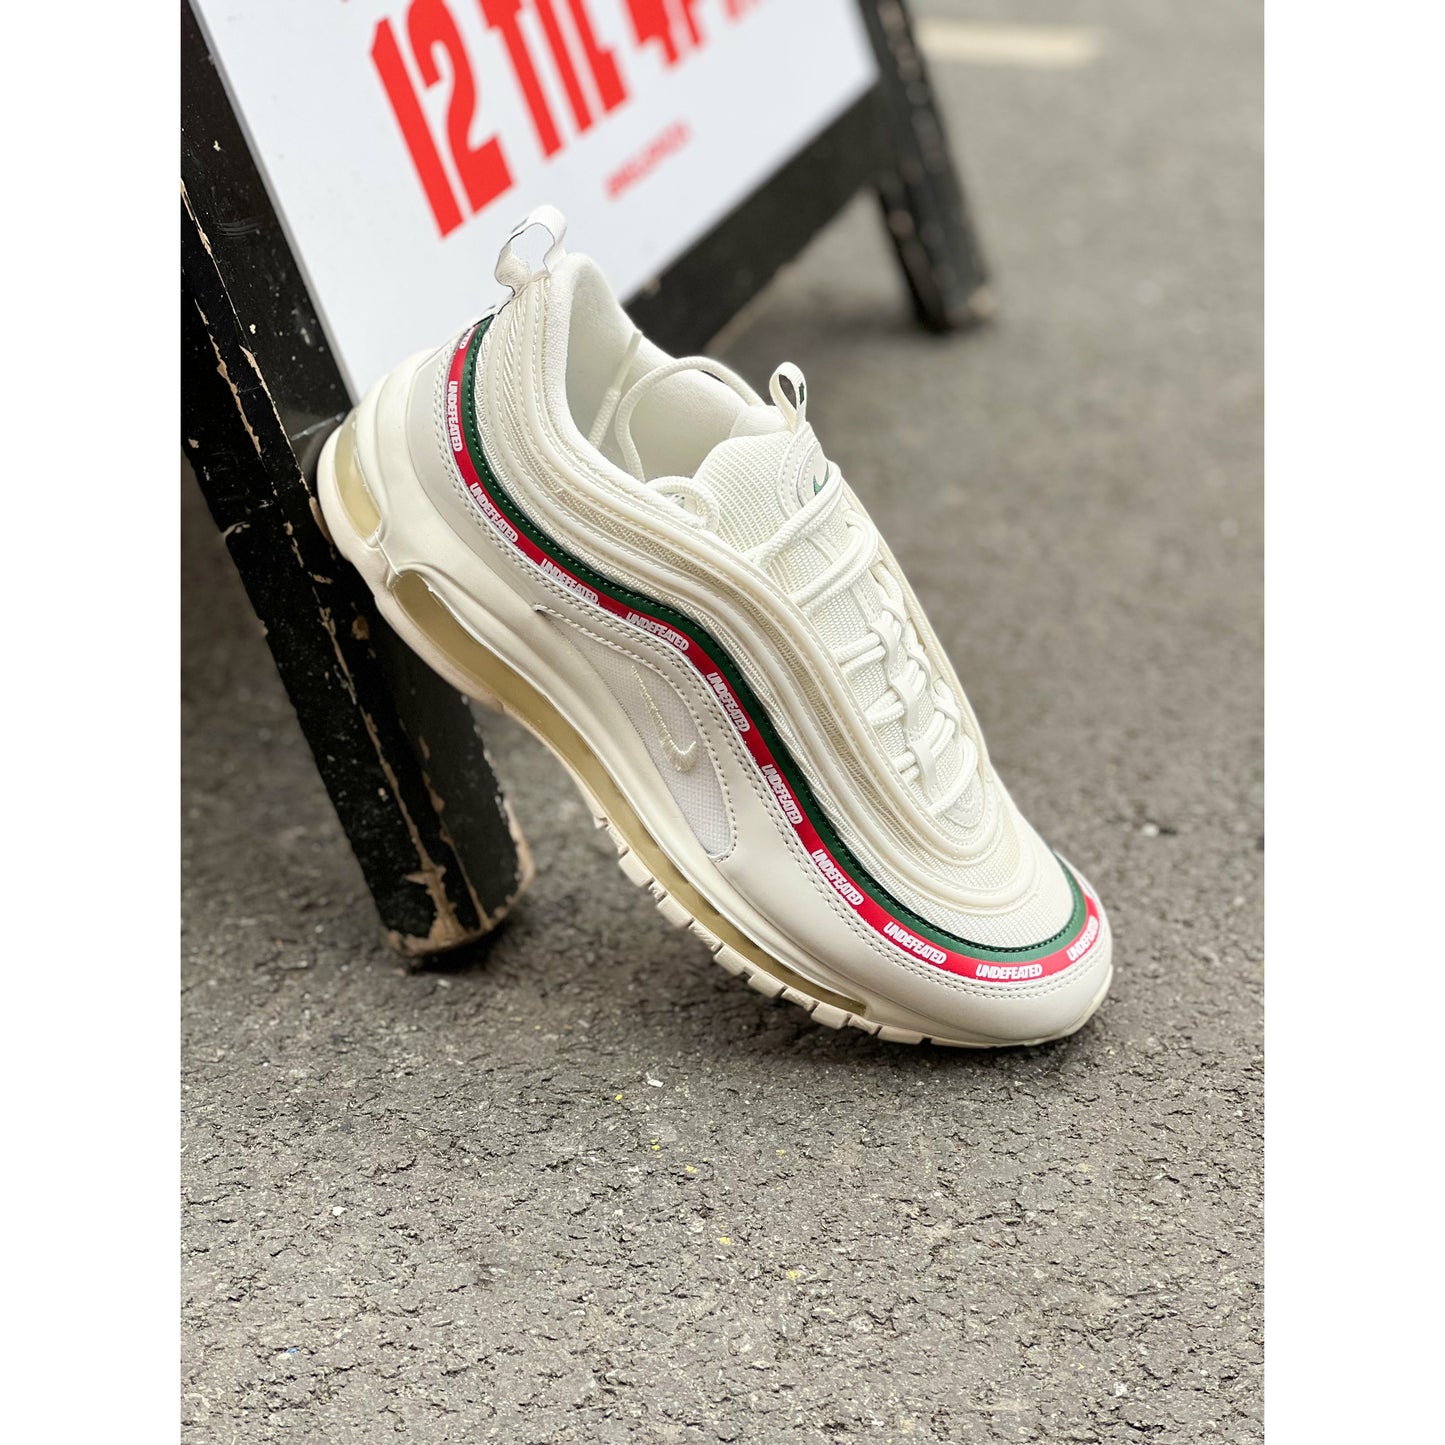 Nike Air Max 97 UNDFTD White from Nike